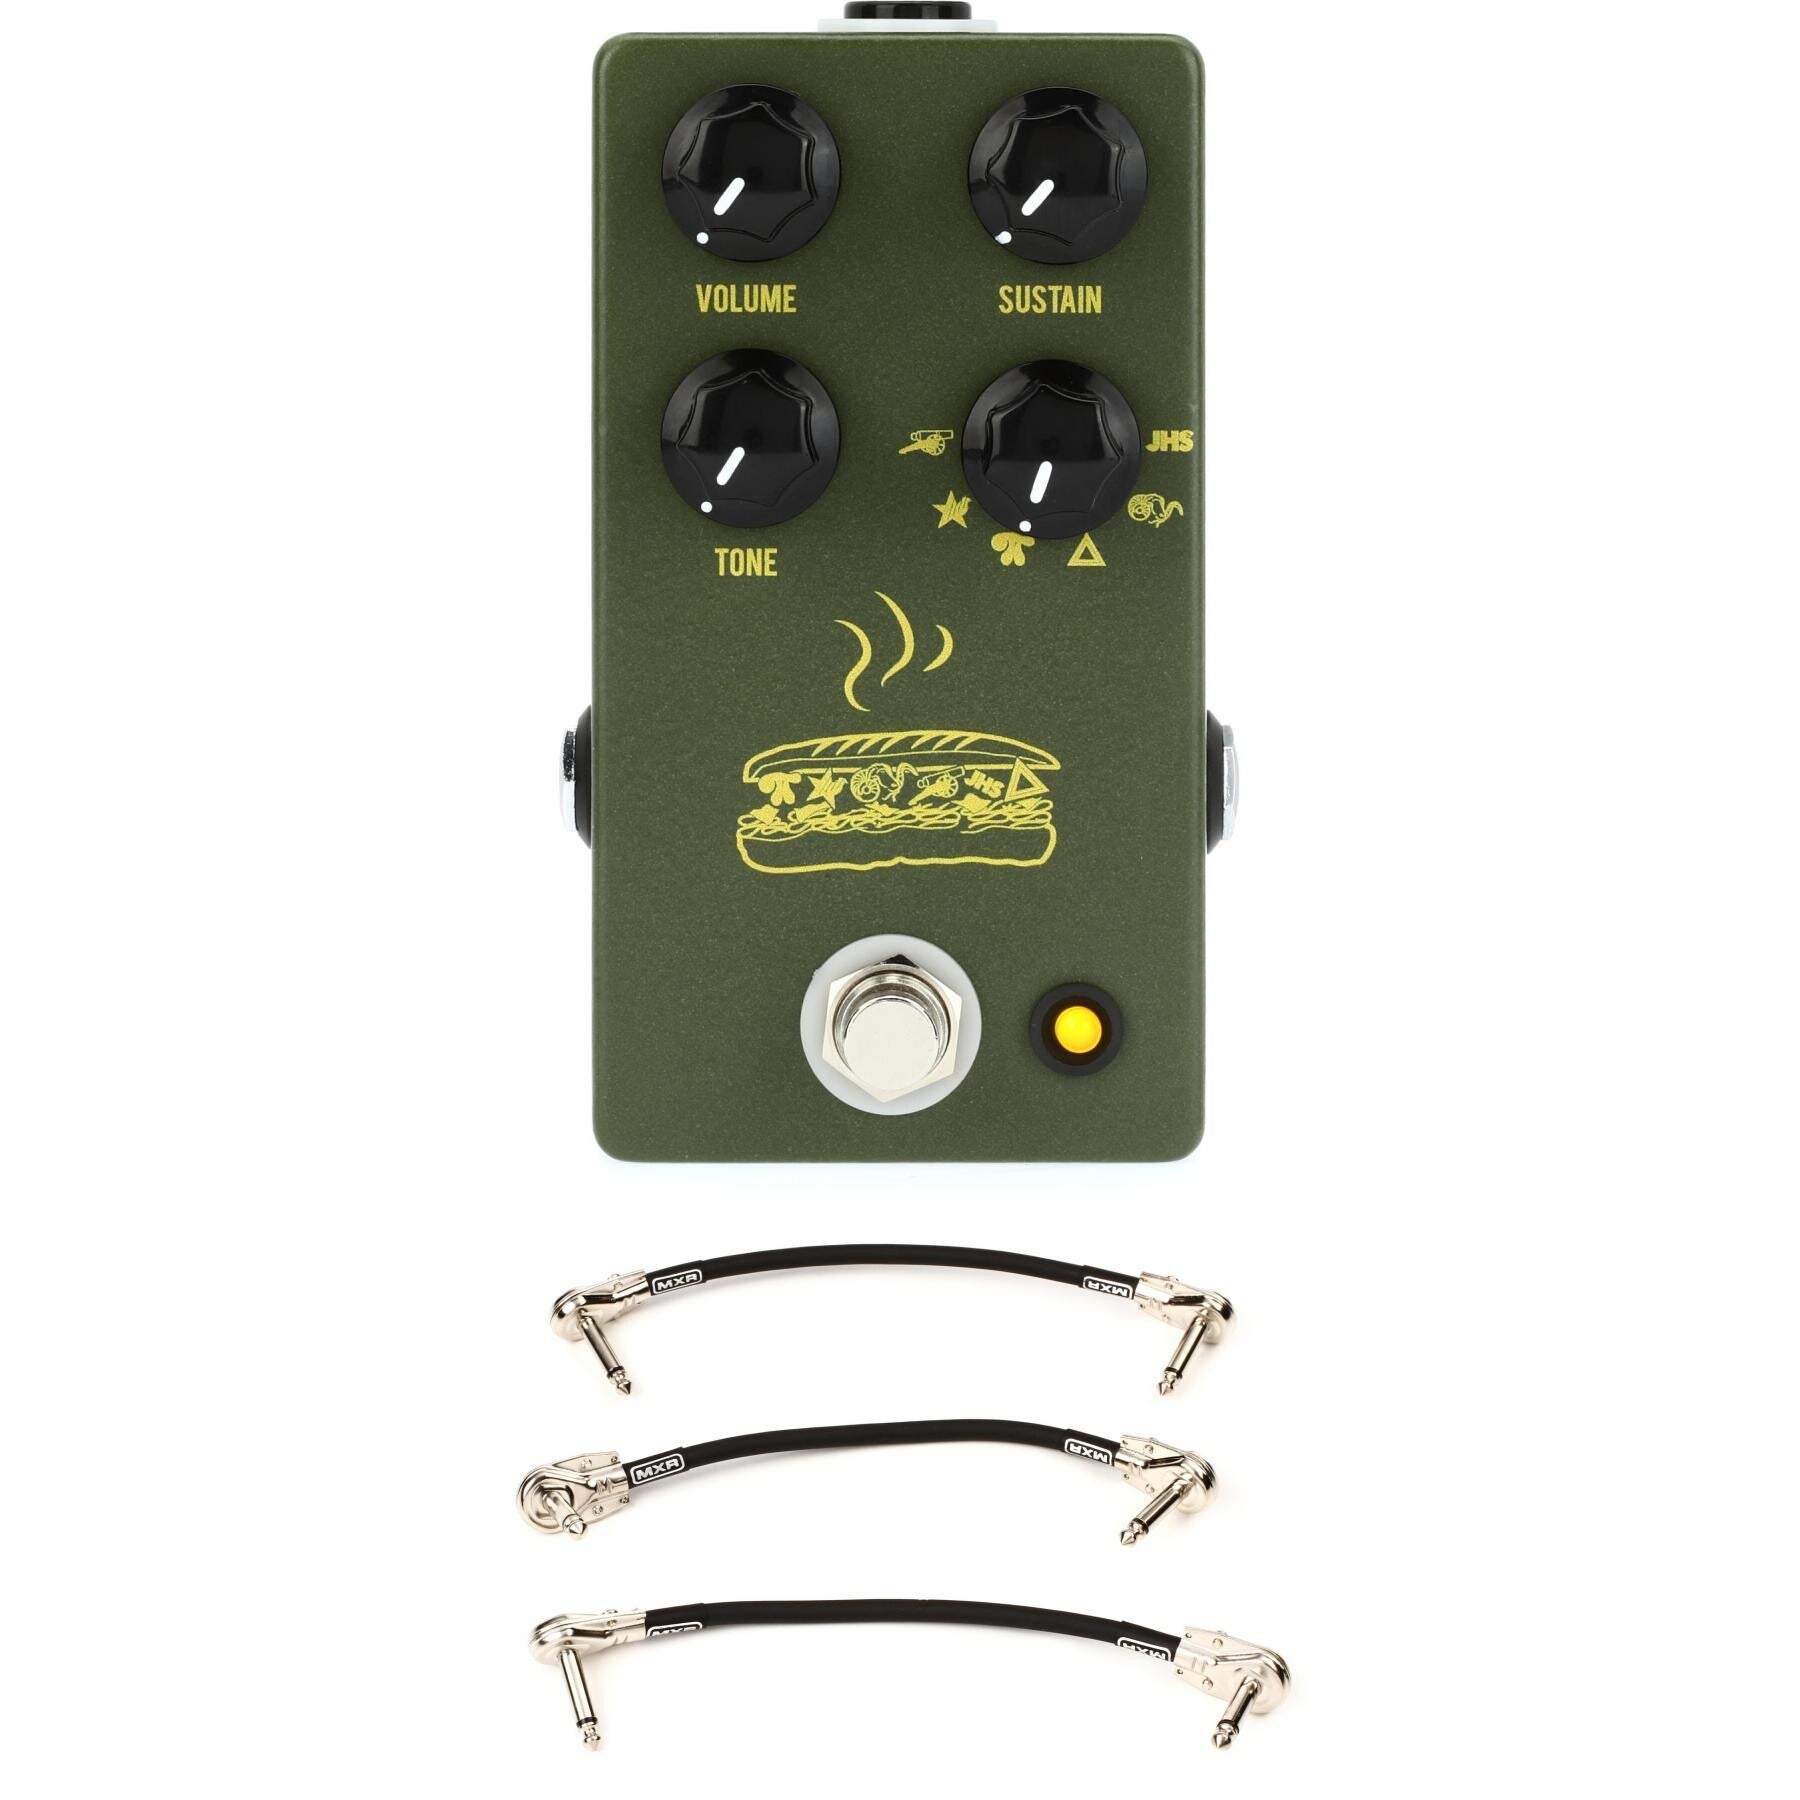 JHS Muffuletta 6-way Fuzz Pedal with Patch Cables - Army Green